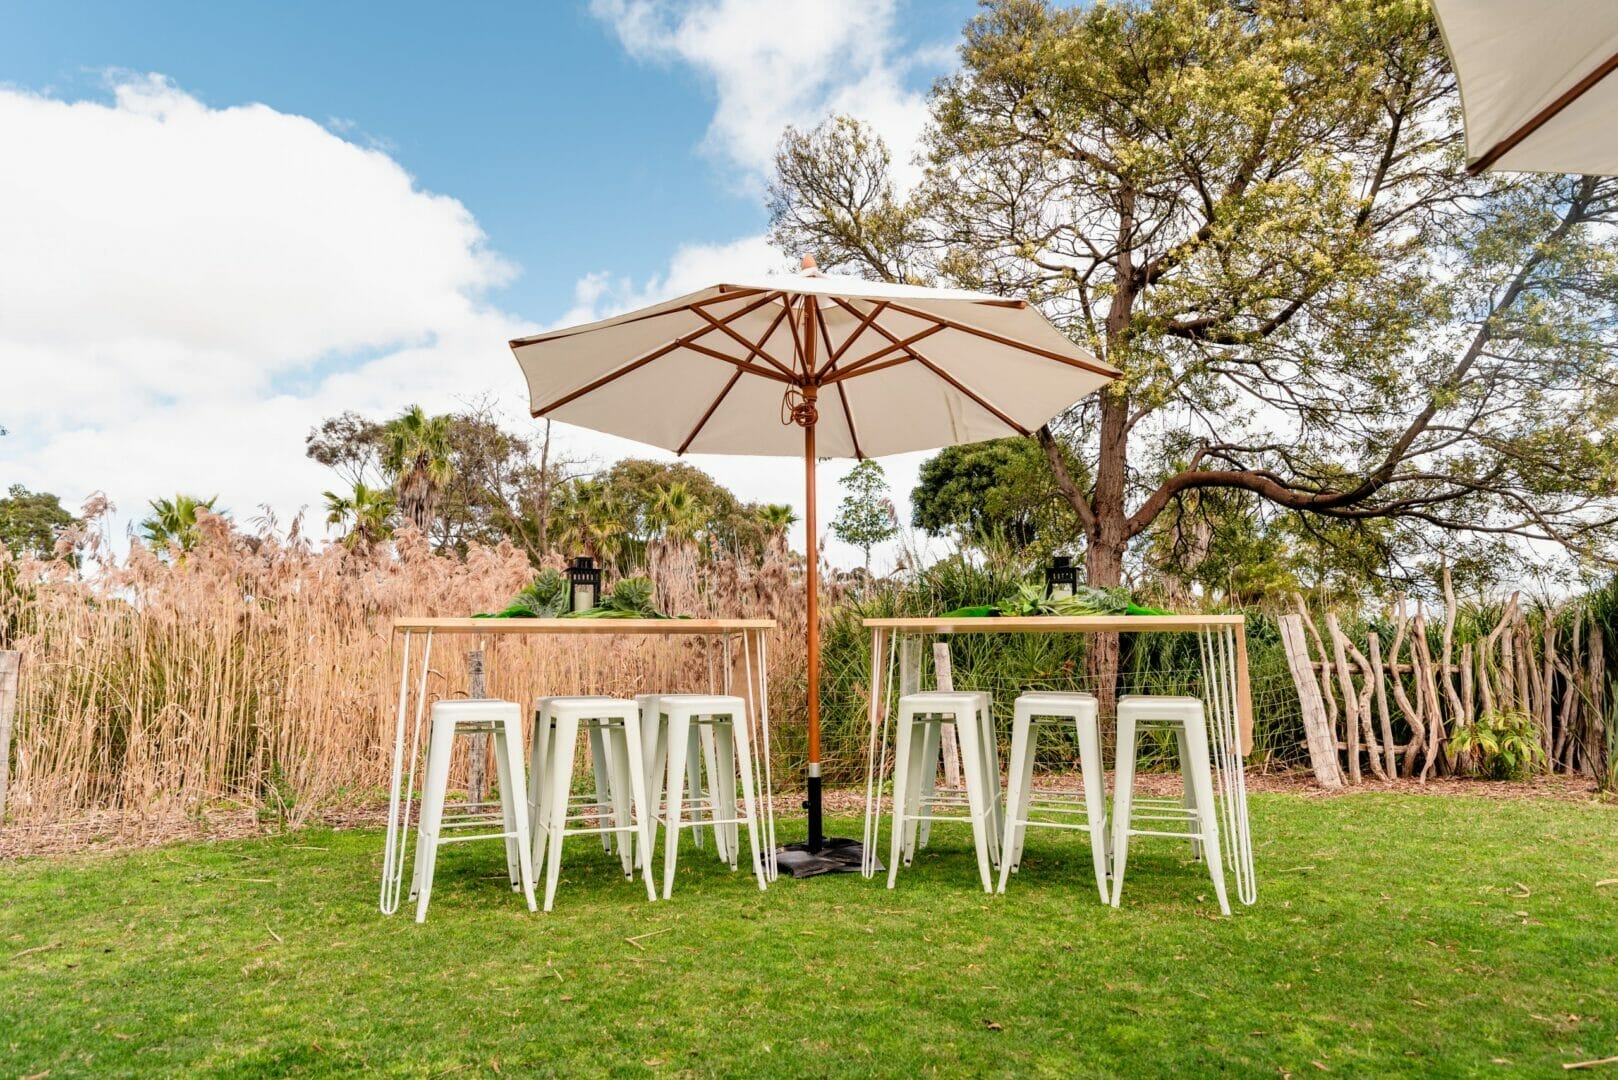 bar tables and stools with umbrellas at werribee zoo events secret garden